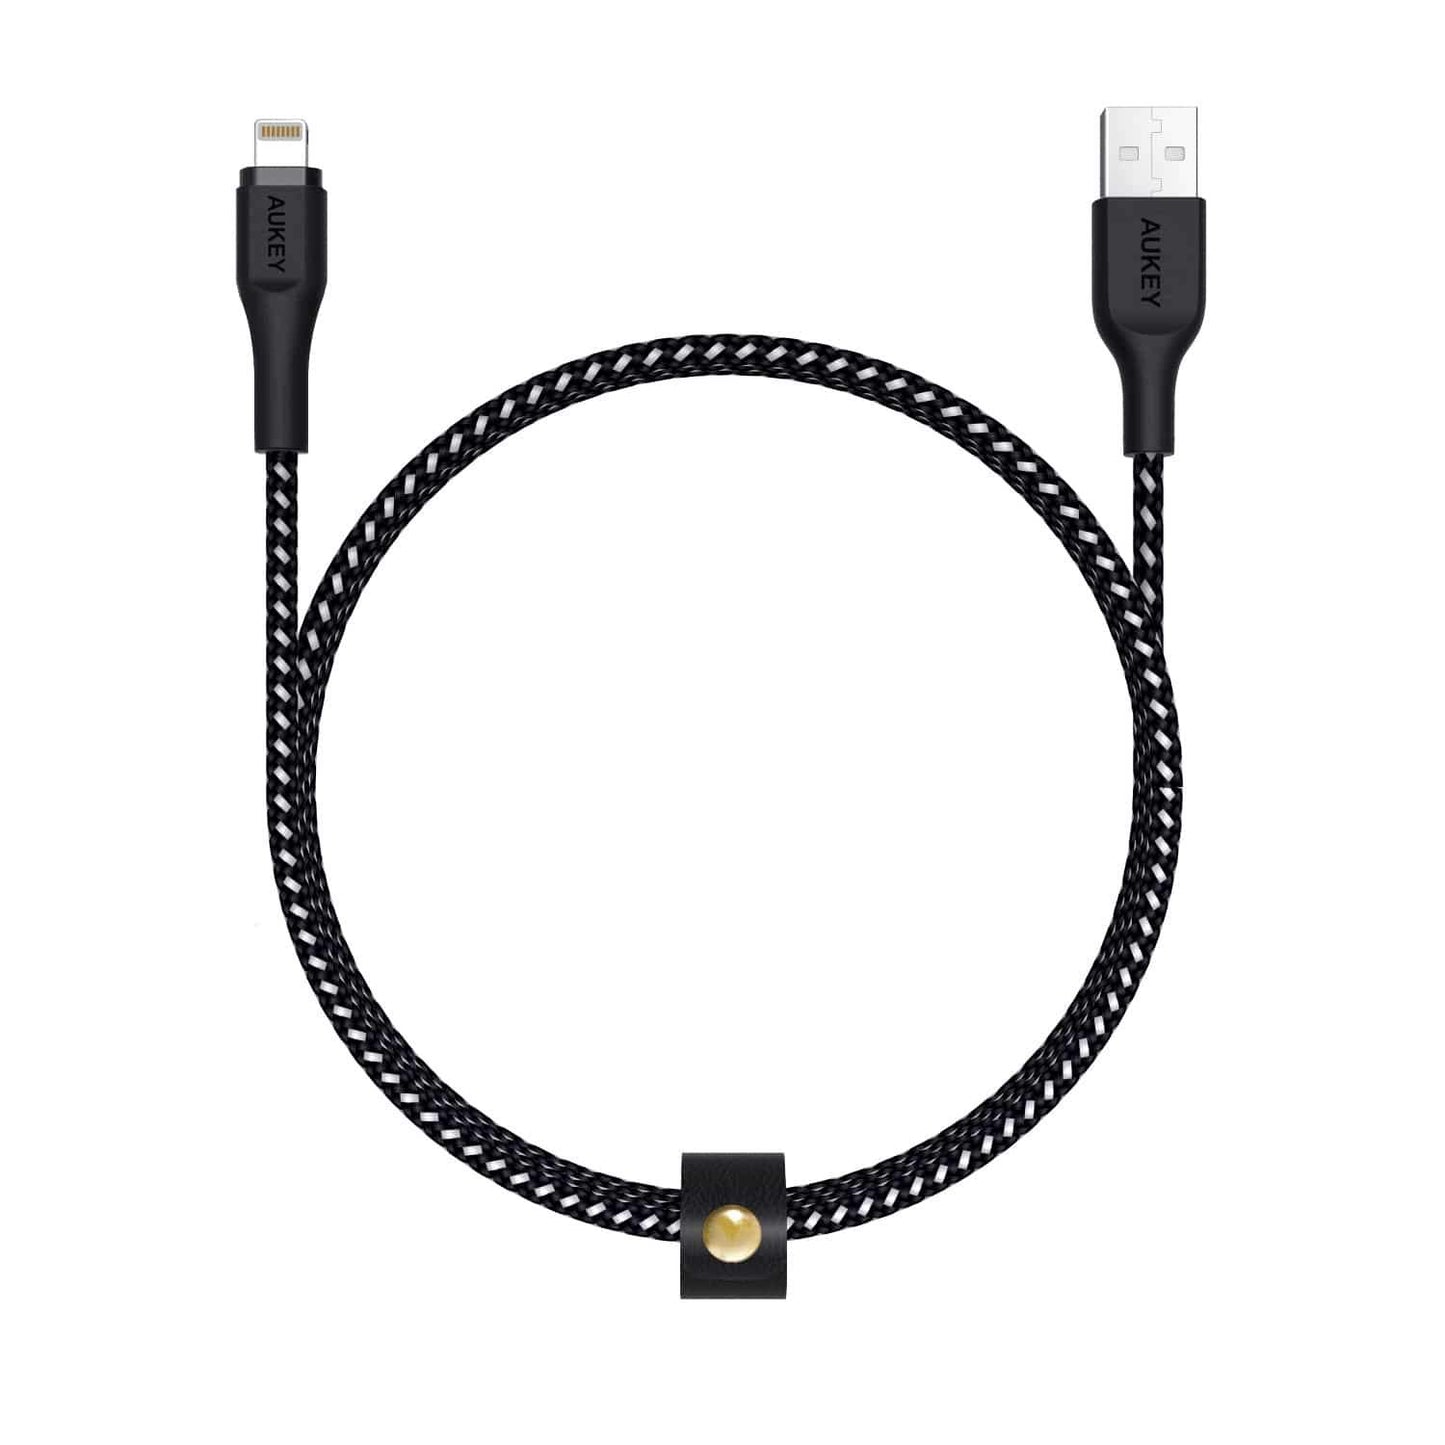 Aukey CB-AL2 MFI Nylon Braided Lightning Cable for Sync and Charging